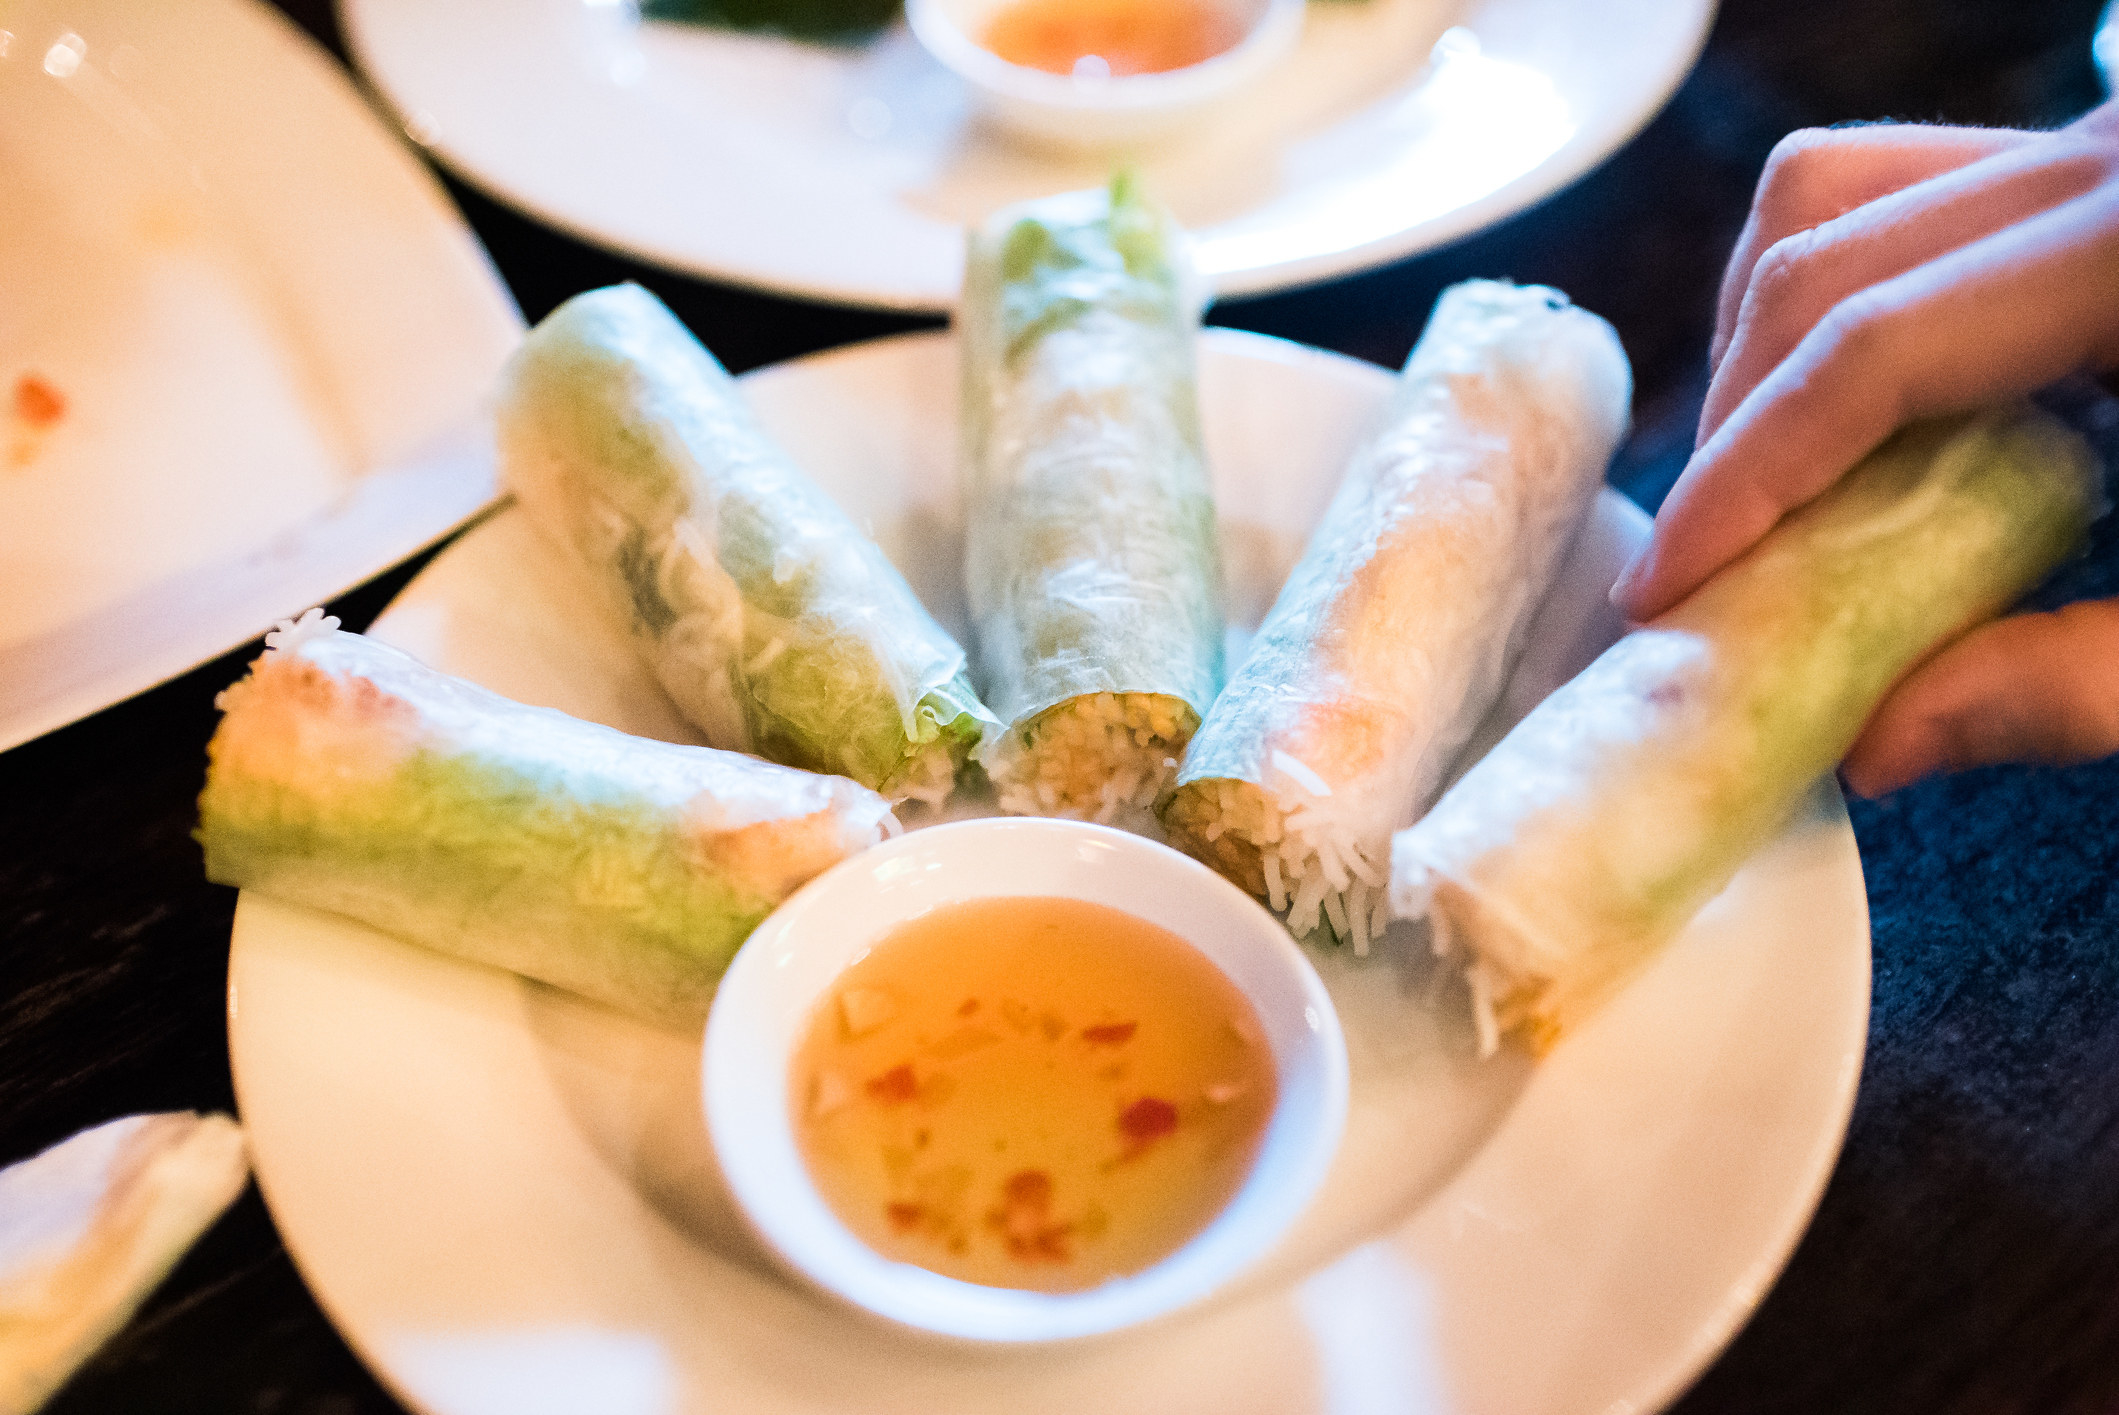 Vietnamese spring rolls with Nuoc cham for dipping.